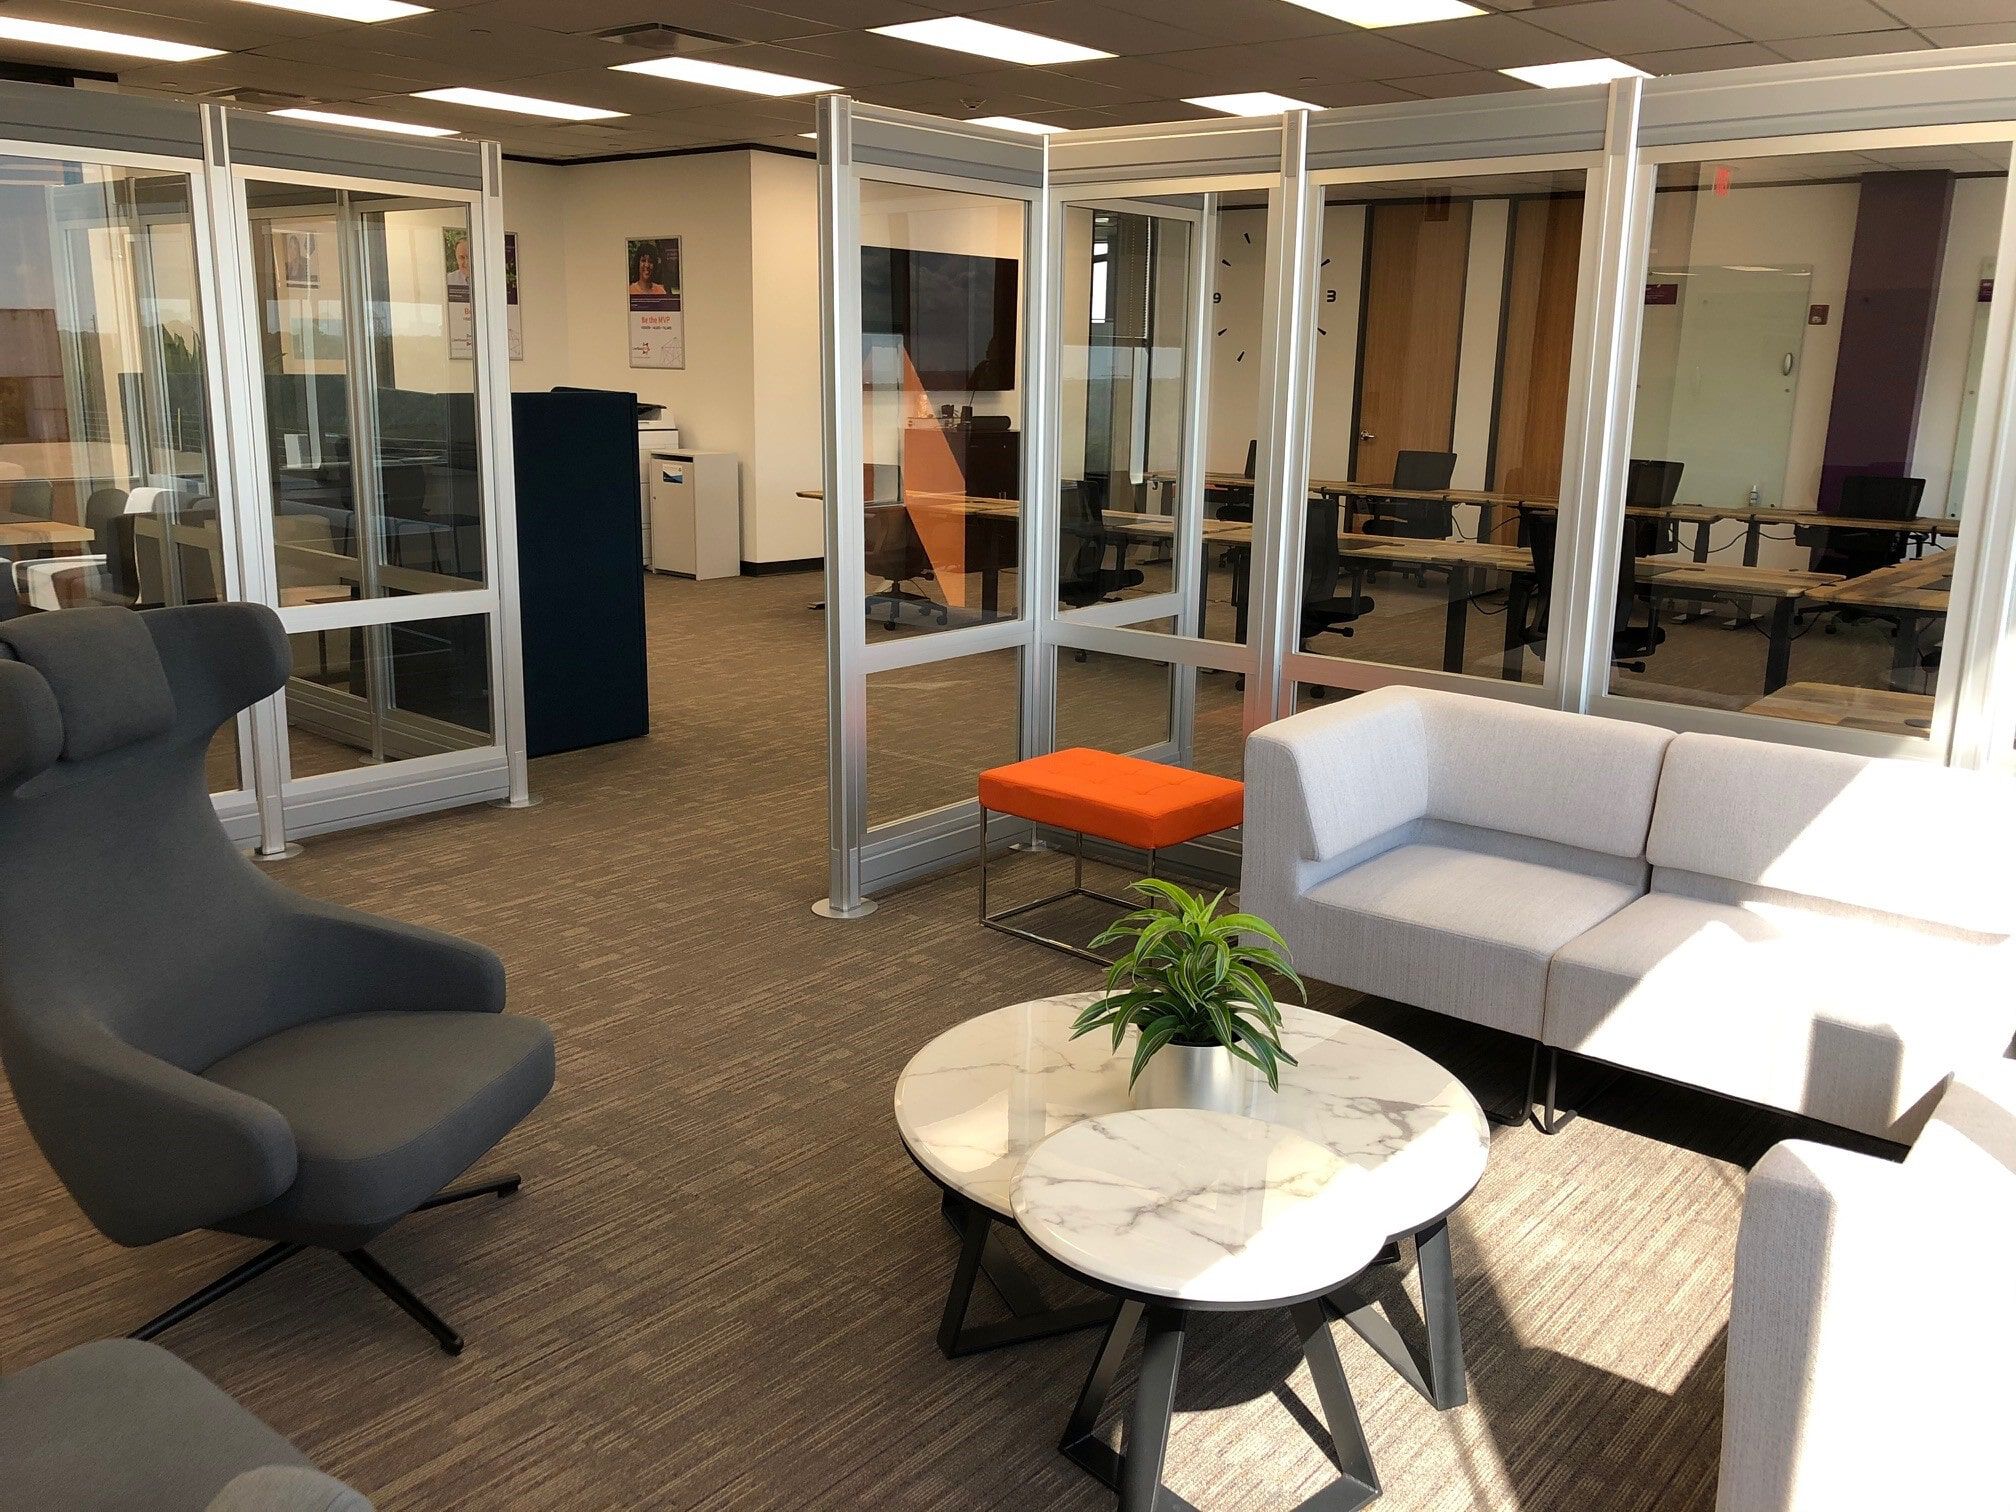 Couches and Vari lounge seating in the office  image